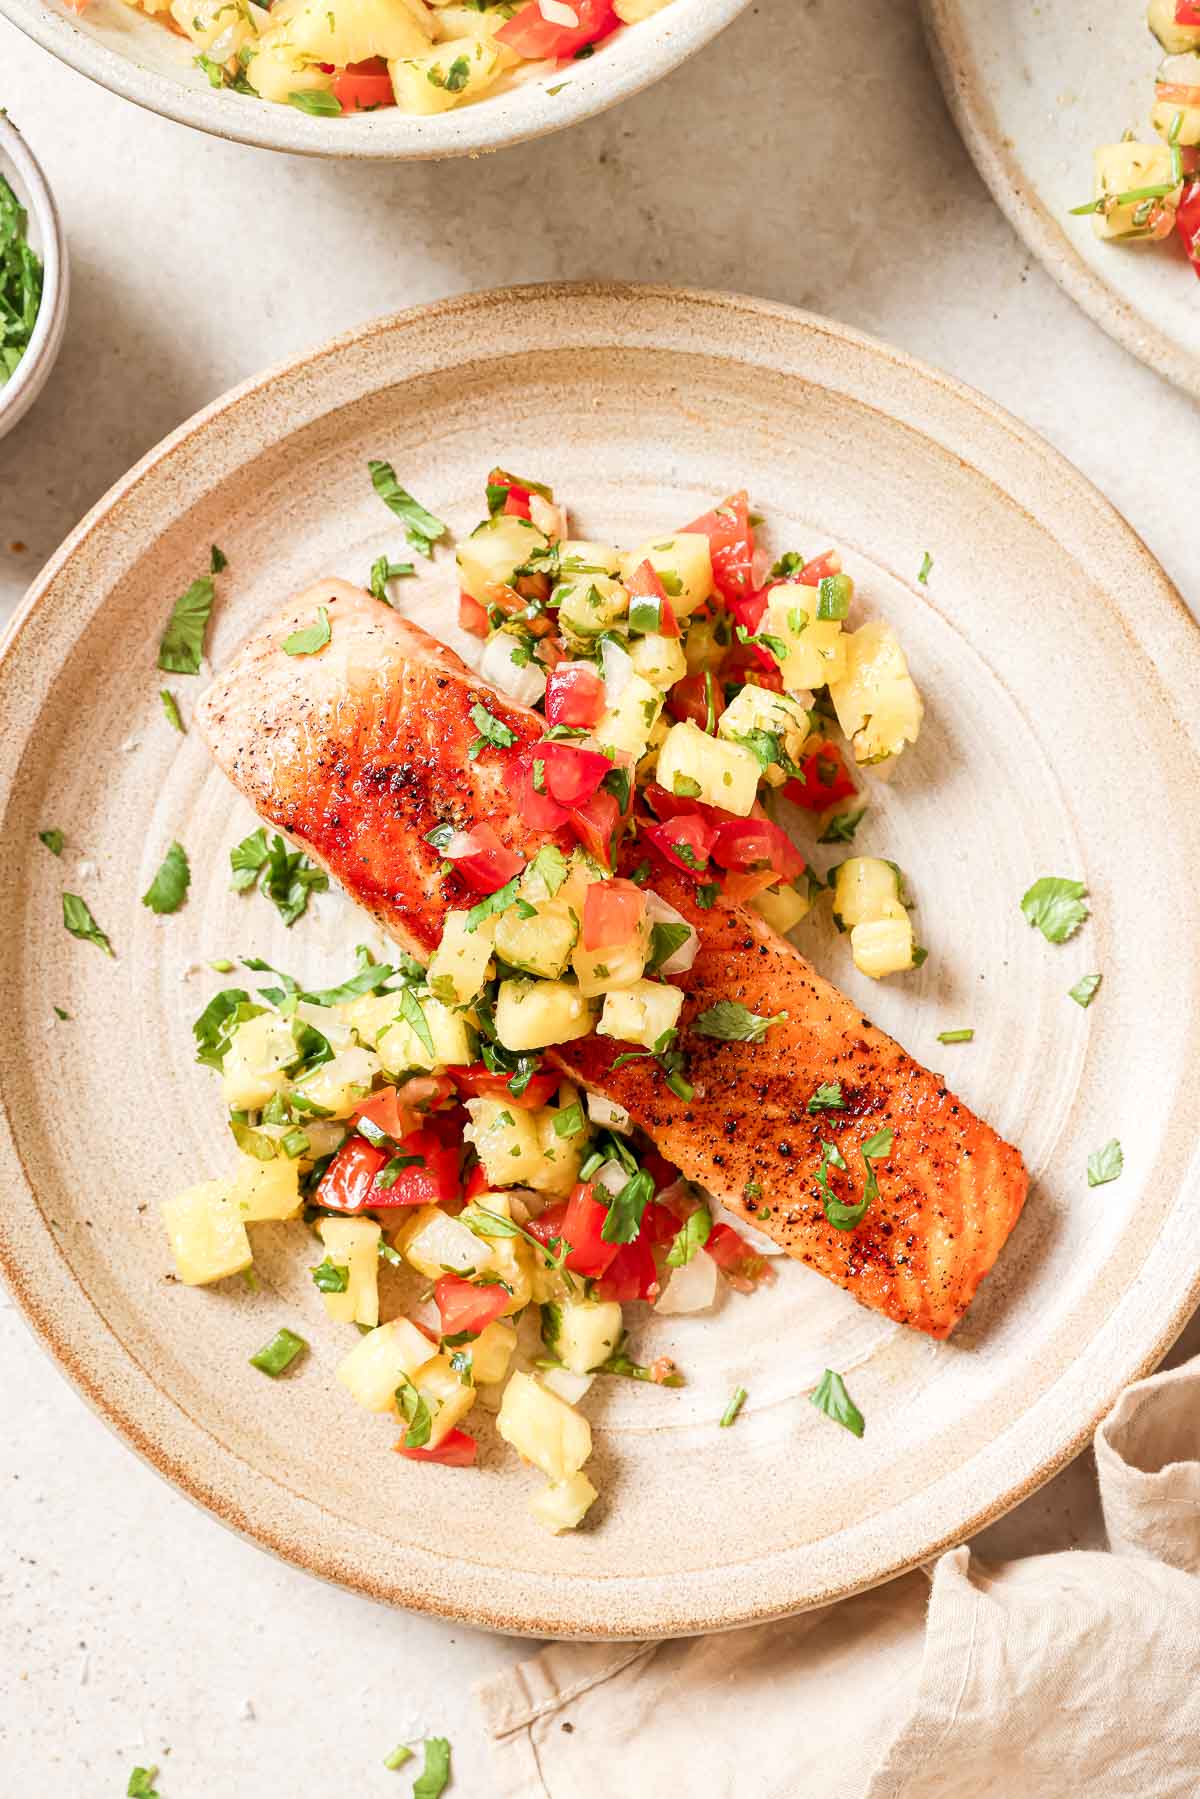 A plate of salmon with a pineapple salsa.